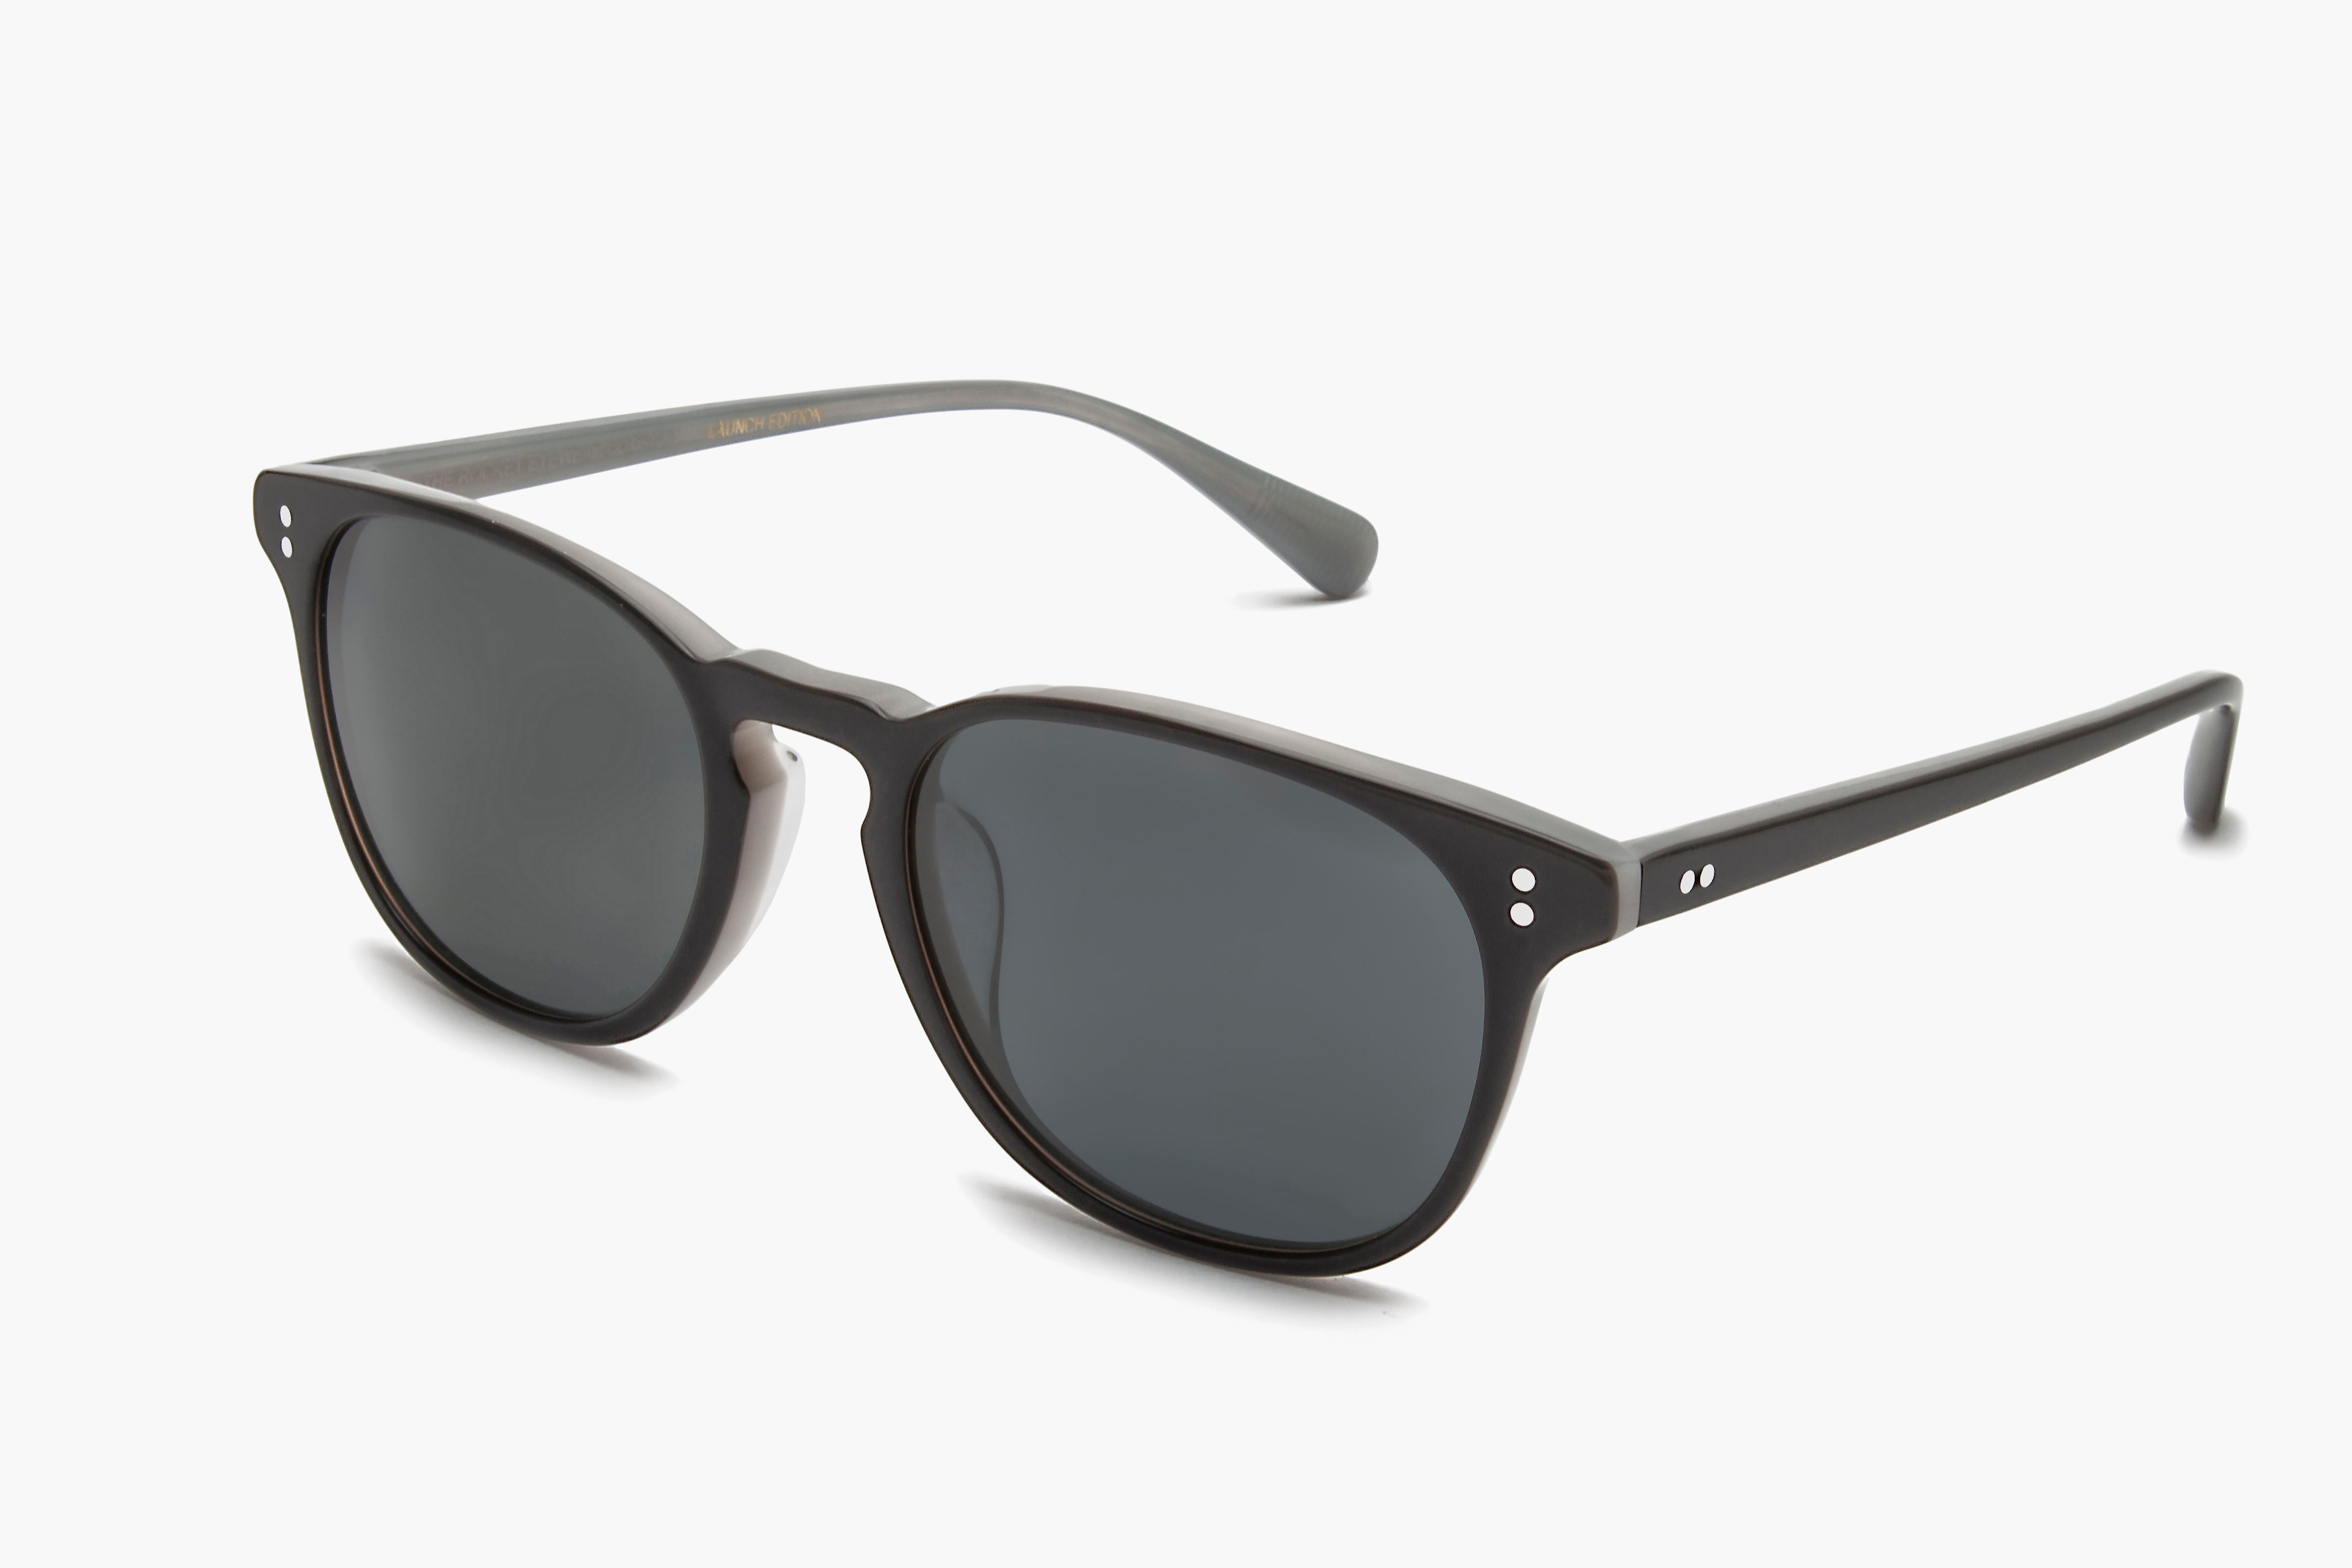 Rocket MTO P3 Classic Onyx/Gainsboro with Grey Polarized Lenses (Launch Edition)